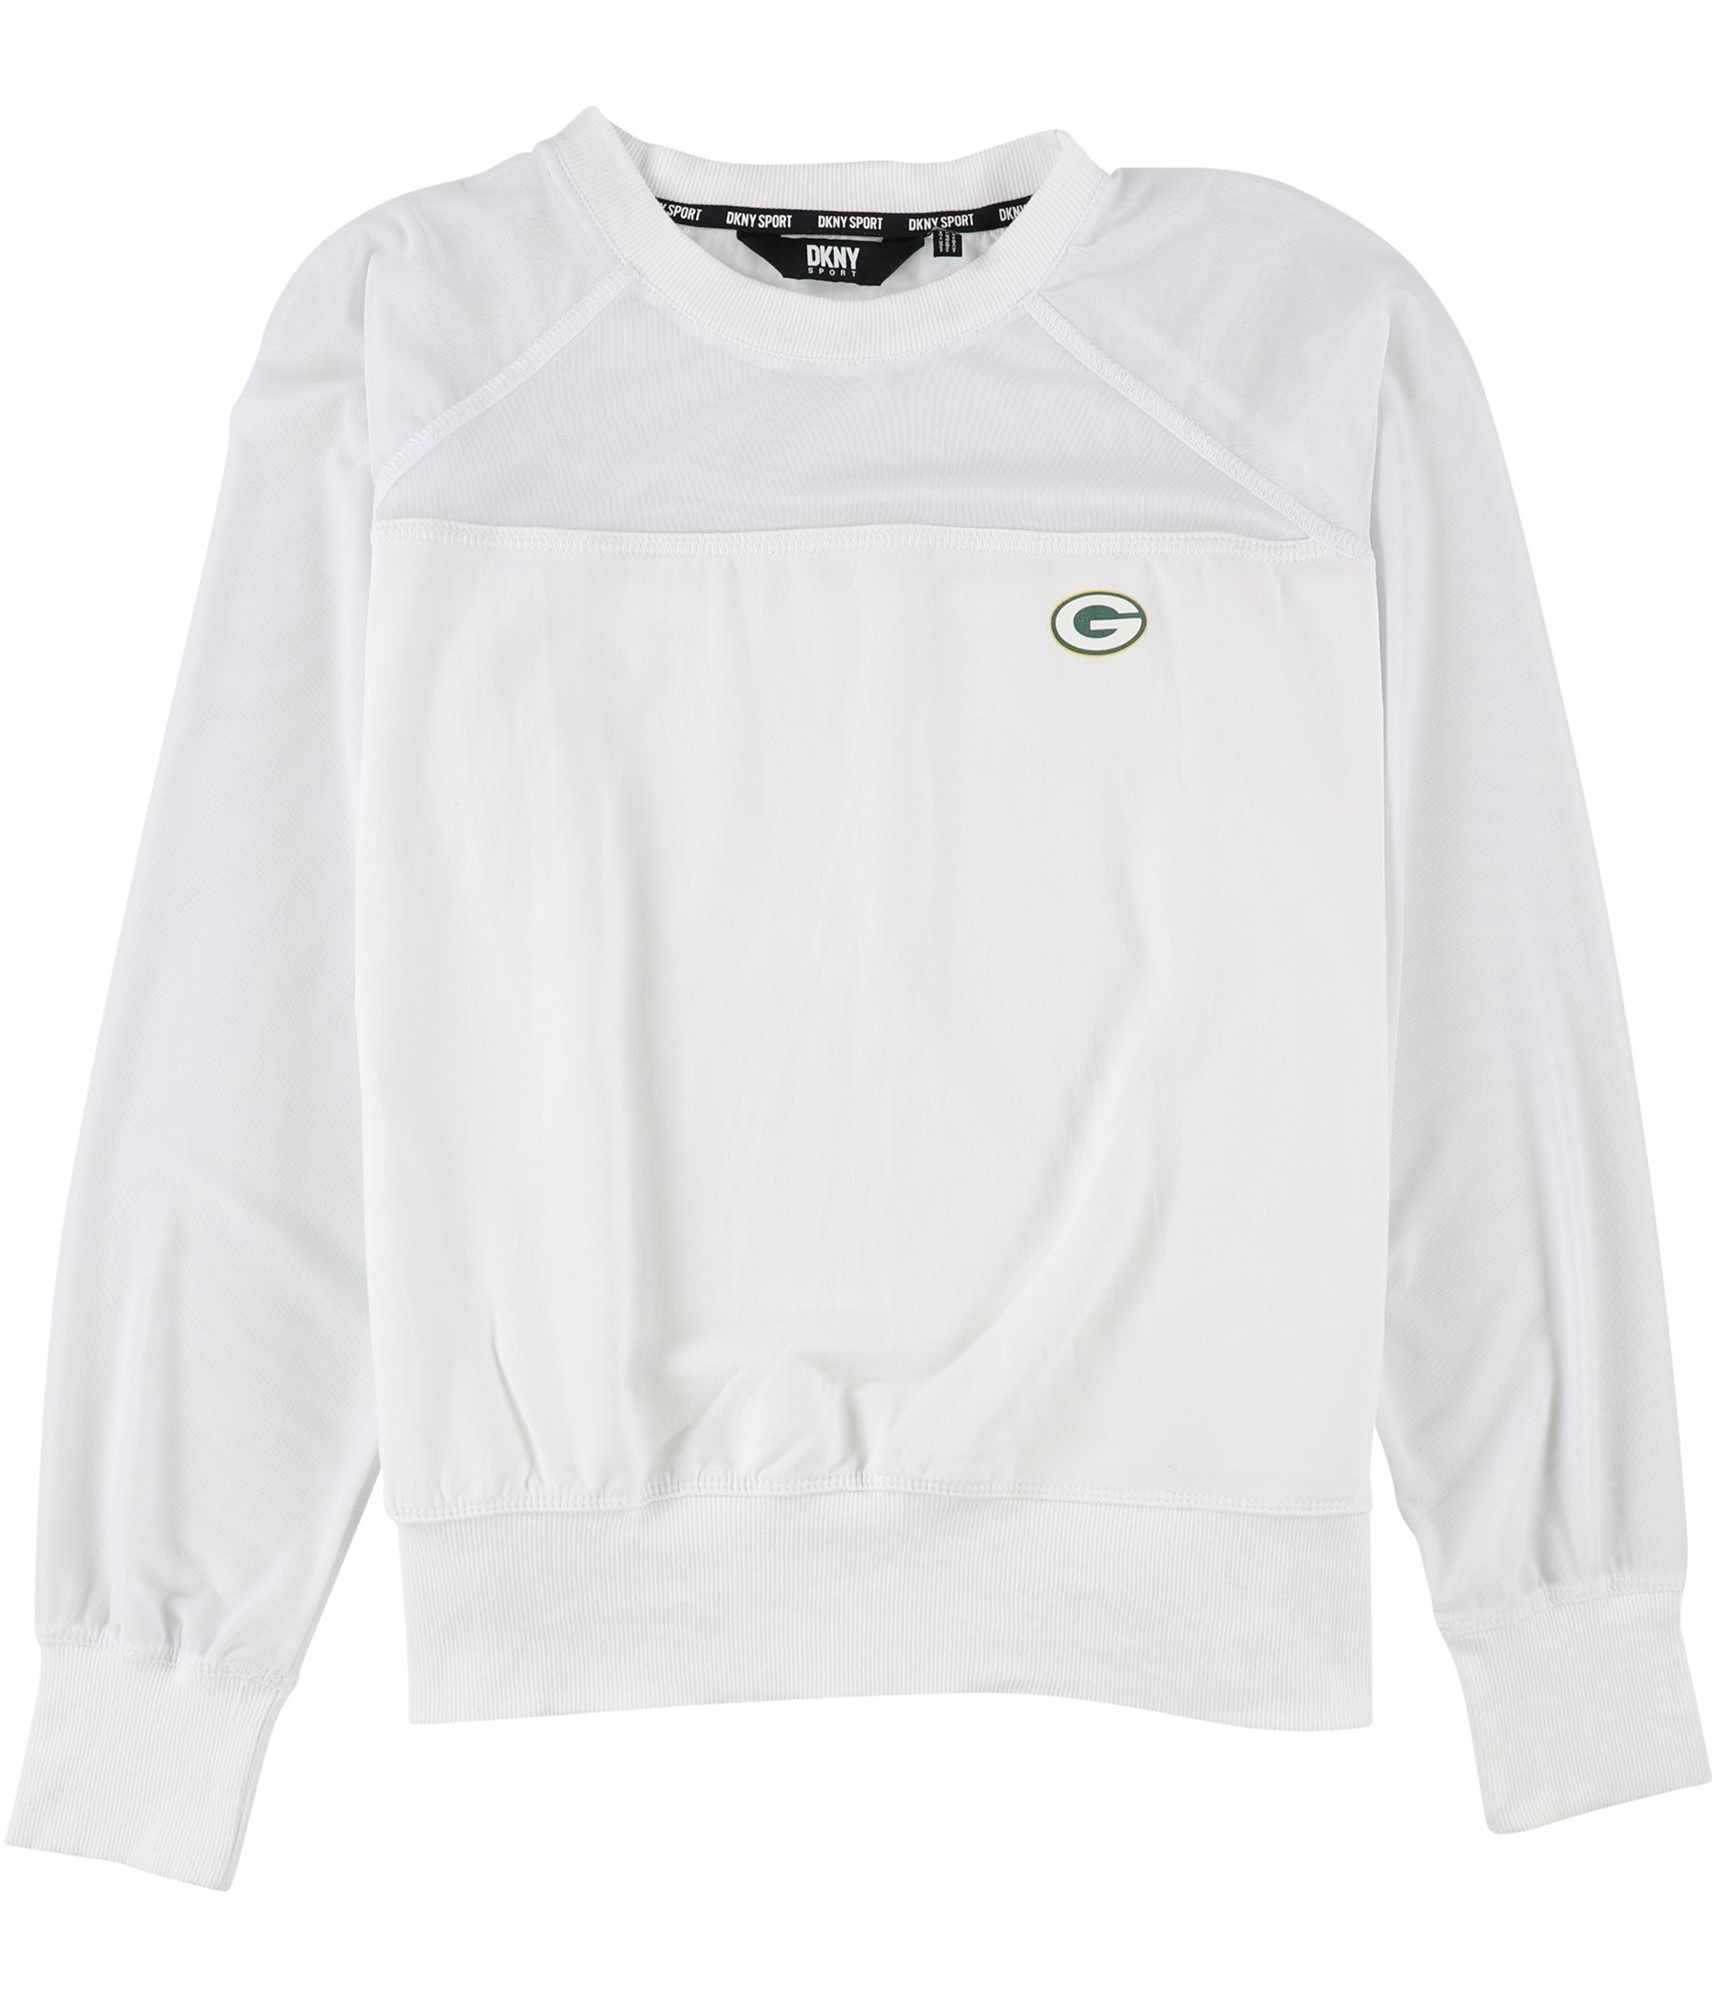 Graphic Tagsweekly Packers | T-Shirt Buy Bay a Womens Green Dkny